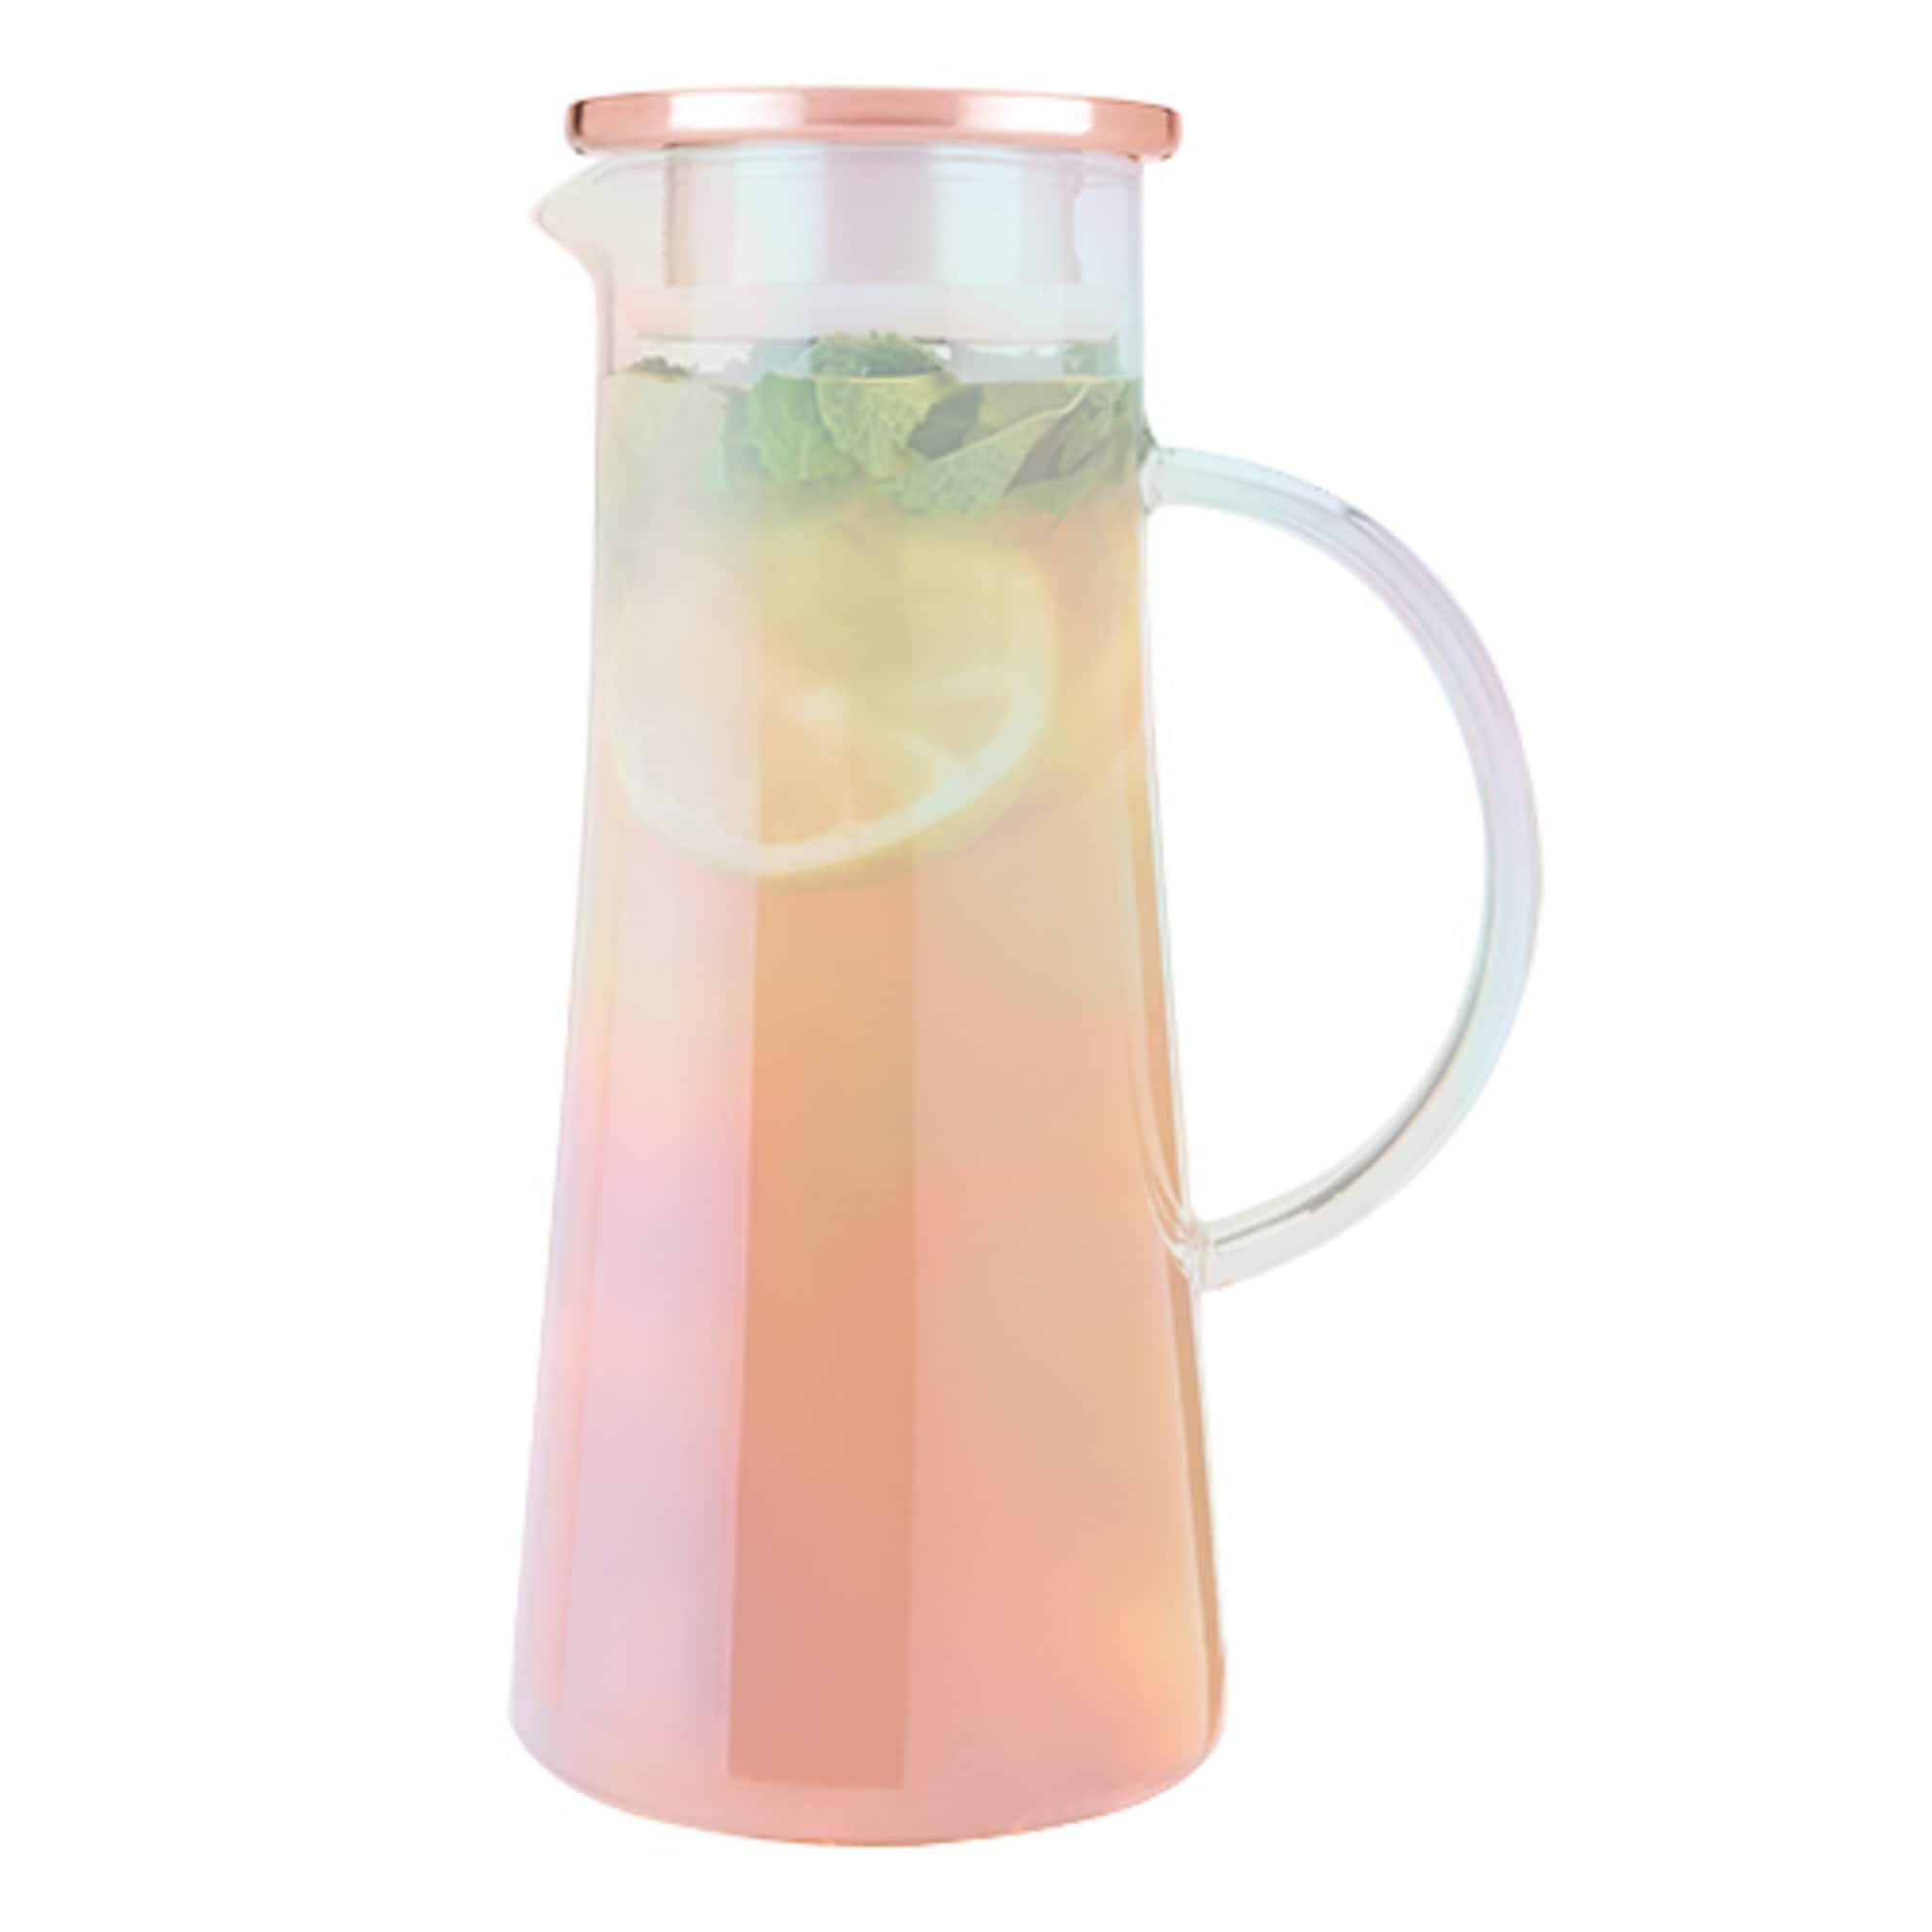 https://ak1.ostkcdn.com/images/products/is/images/direct/ecd2d3e62249c5ab52170fc2838bdbe1fb97a864/Charlie-Iridescent-Glass-Iced-Tea-Carafe-by-Pinky-Up.jpg